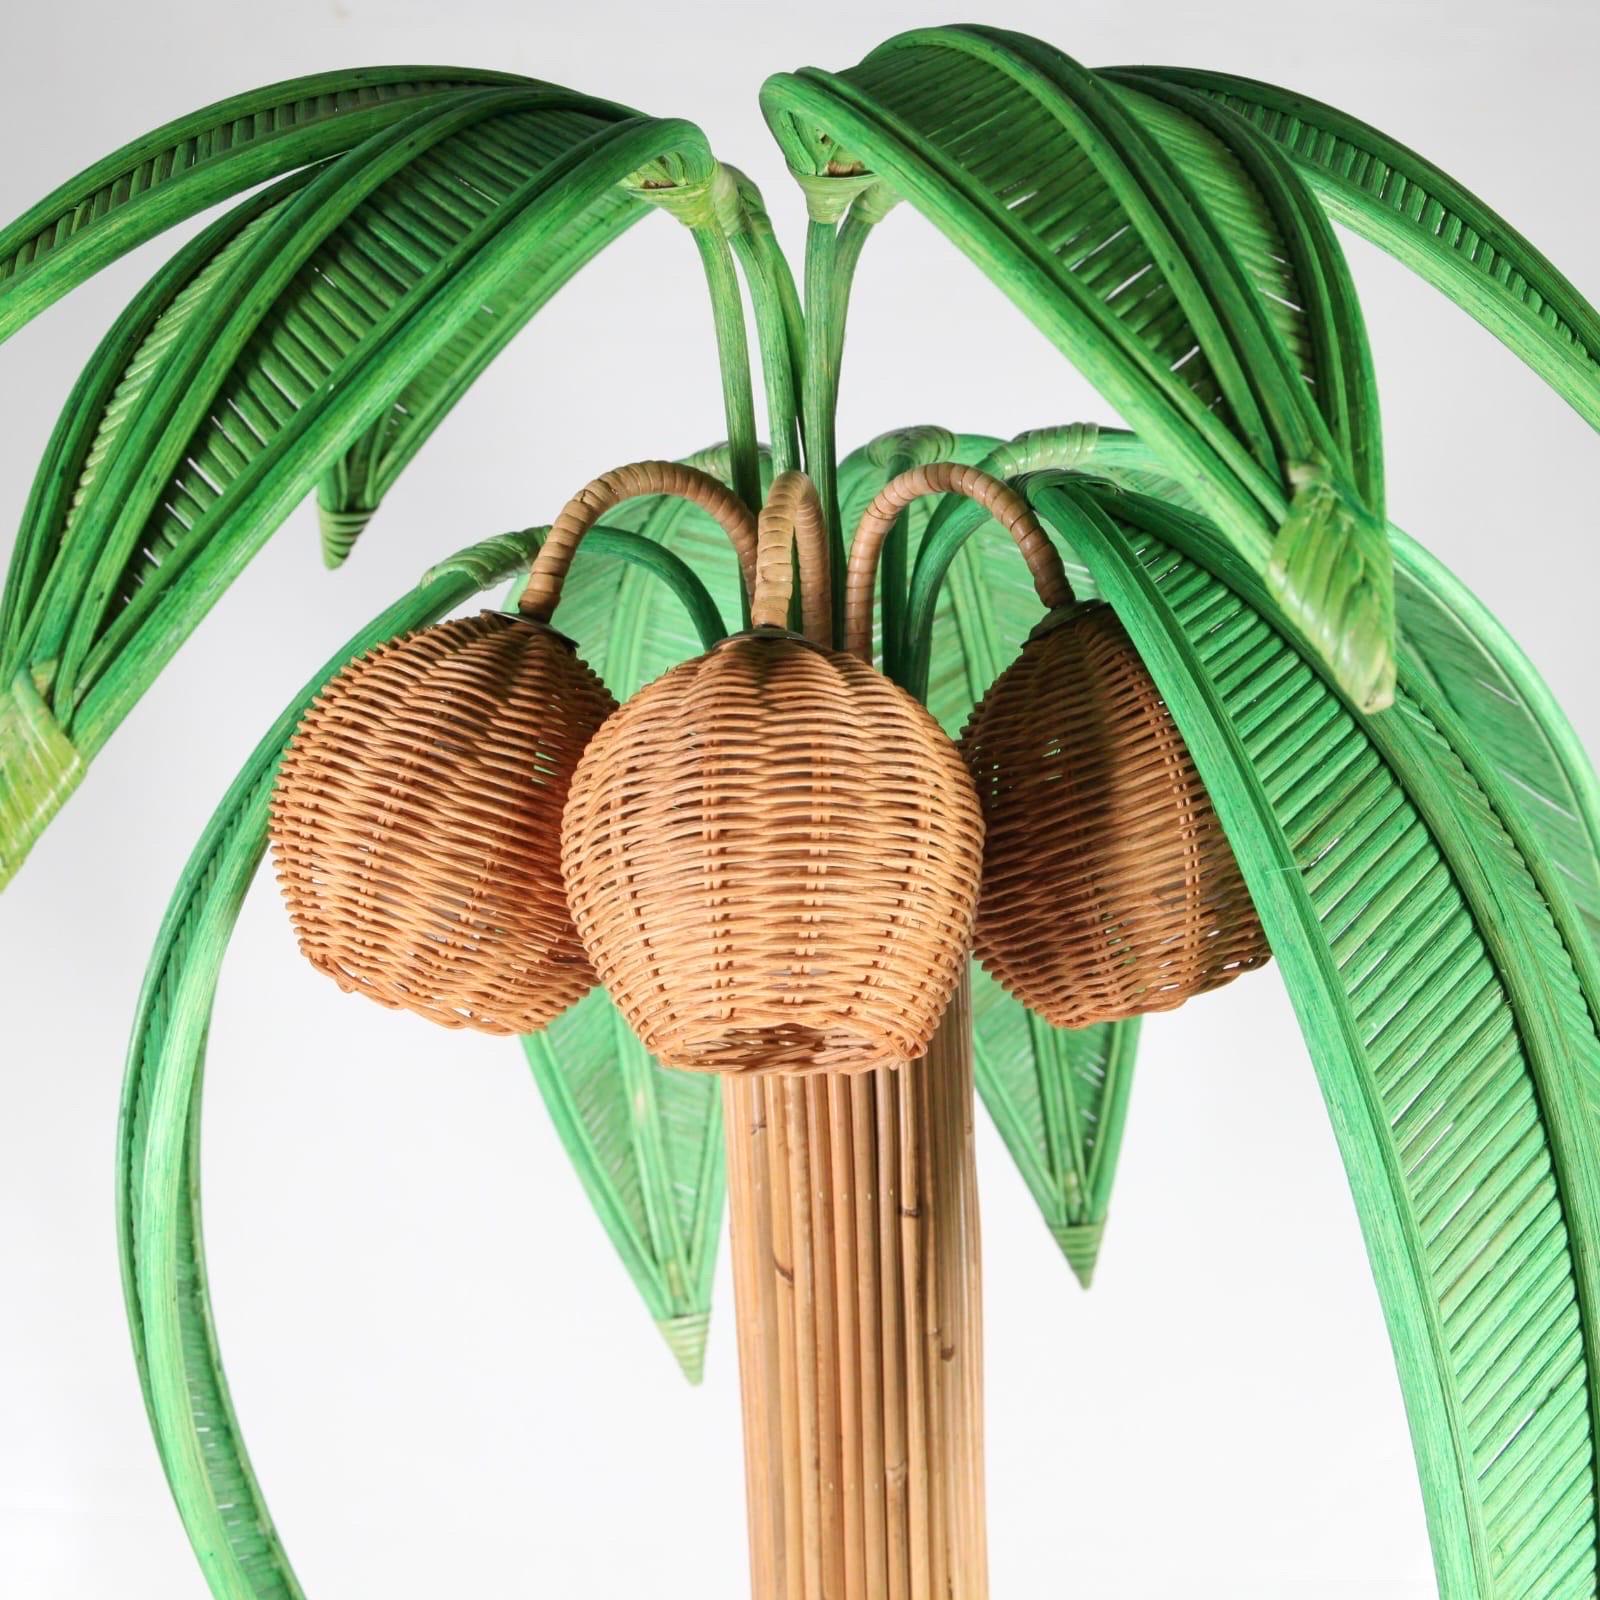 Very decorative floor lamp with 10 green adjustable palms and 3 lights in the coconuts.
Great quality as it is all very meticulously hand made.
Excellent condition.